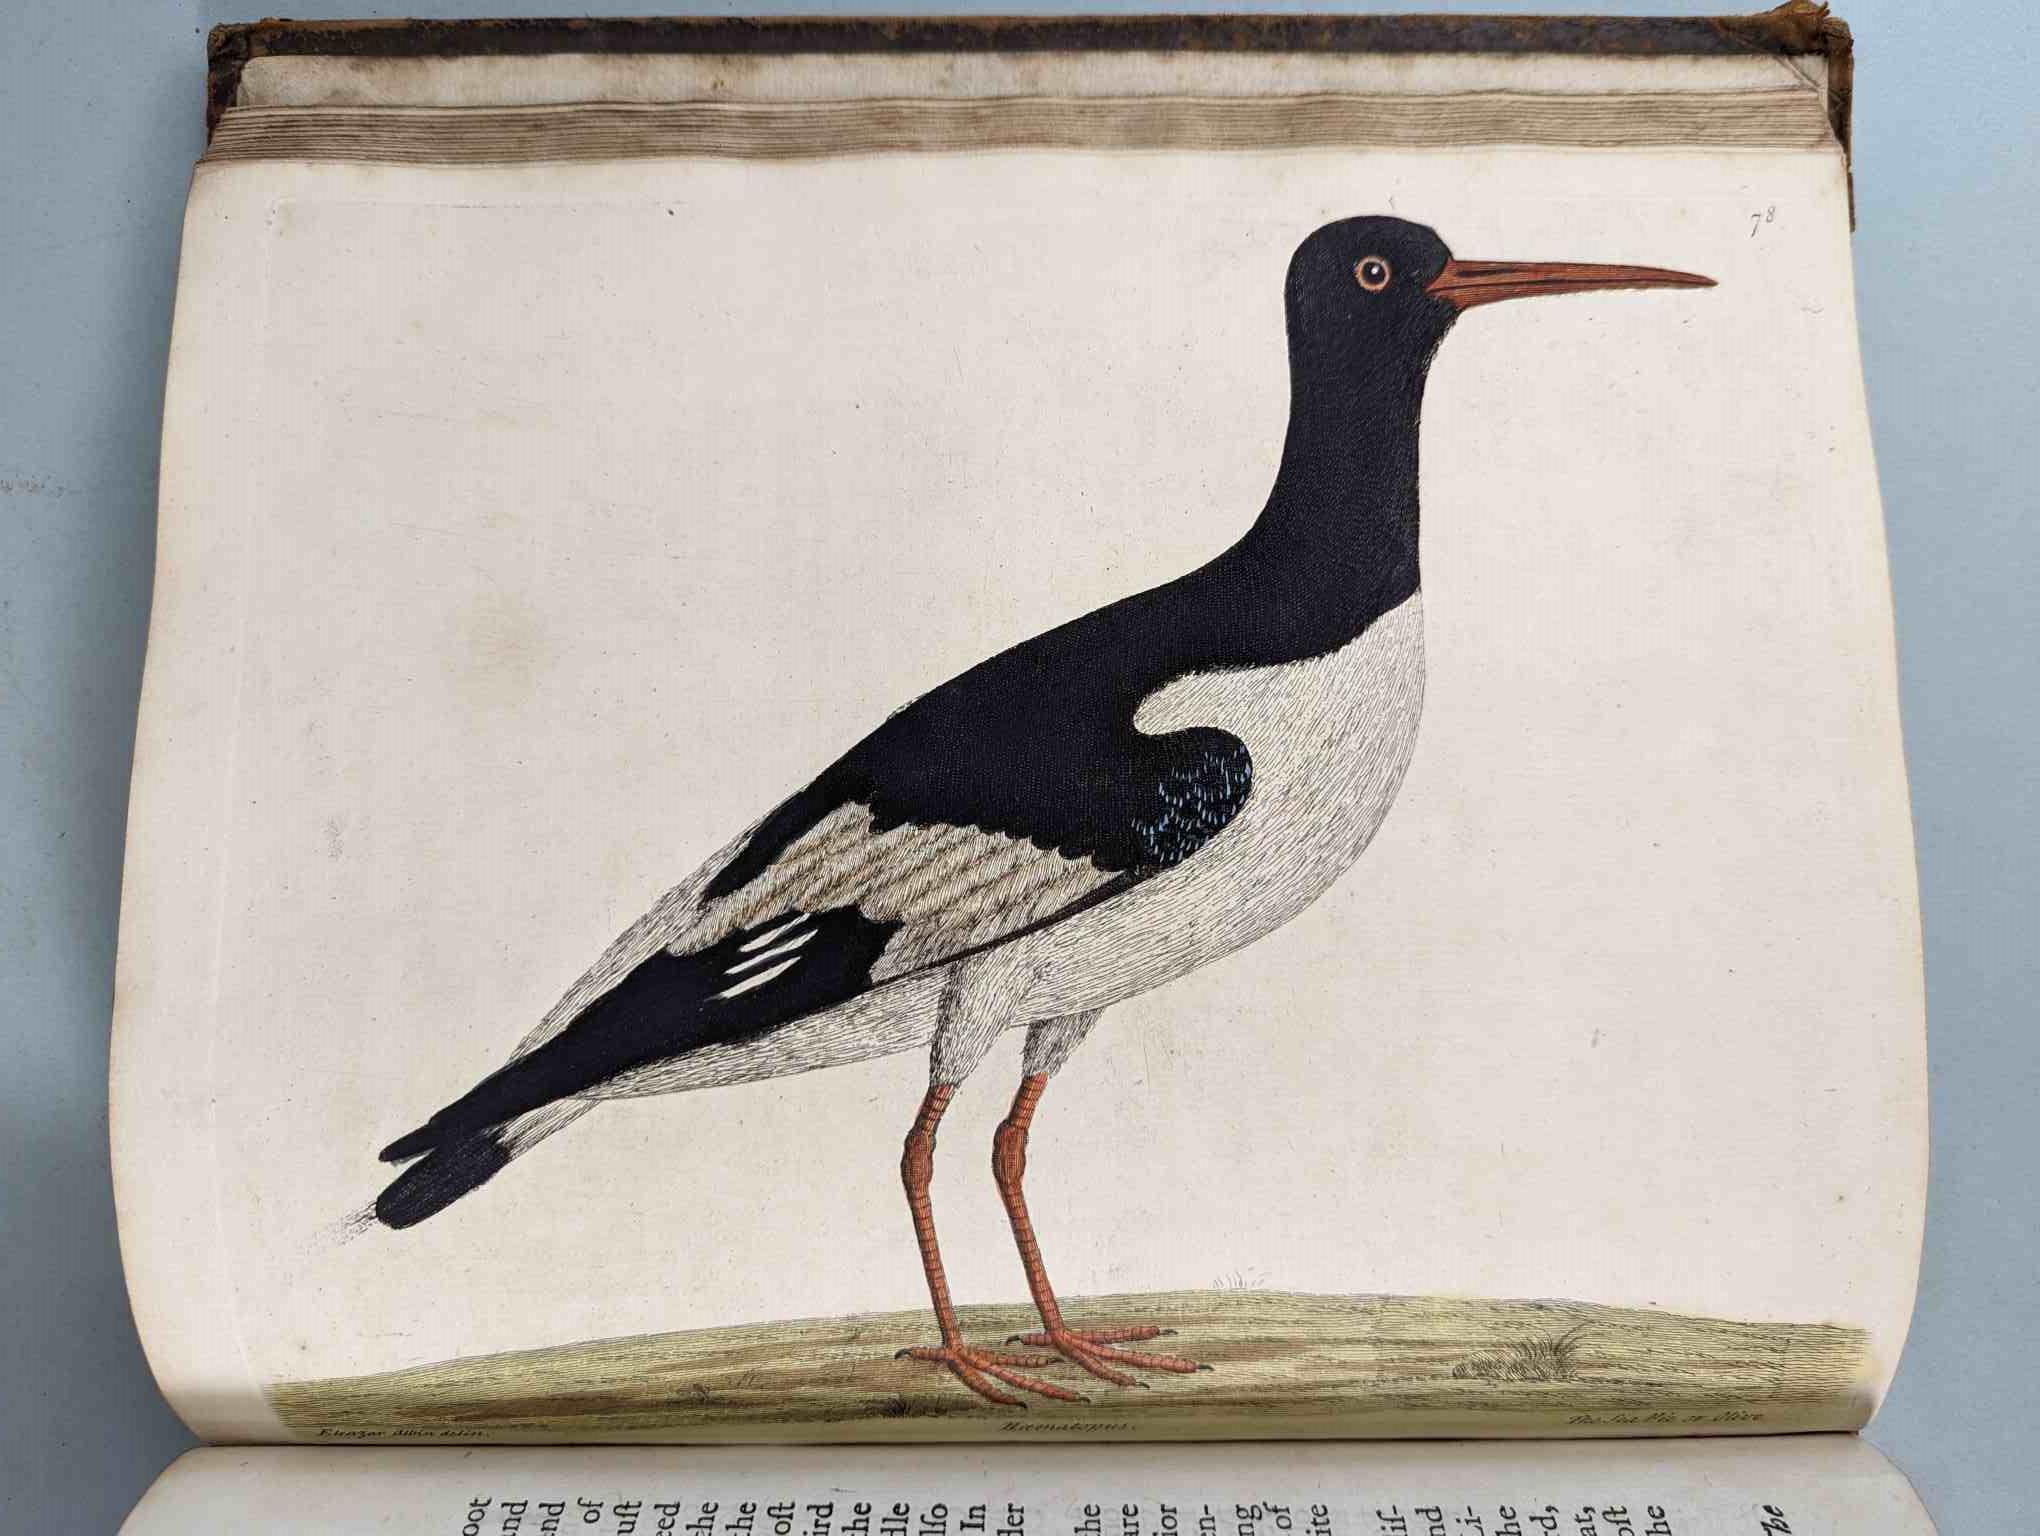 ALBIN, Eleazar. A Natural History of Birds, to which are added, Notes and Observations by W. - Image 81 of 208